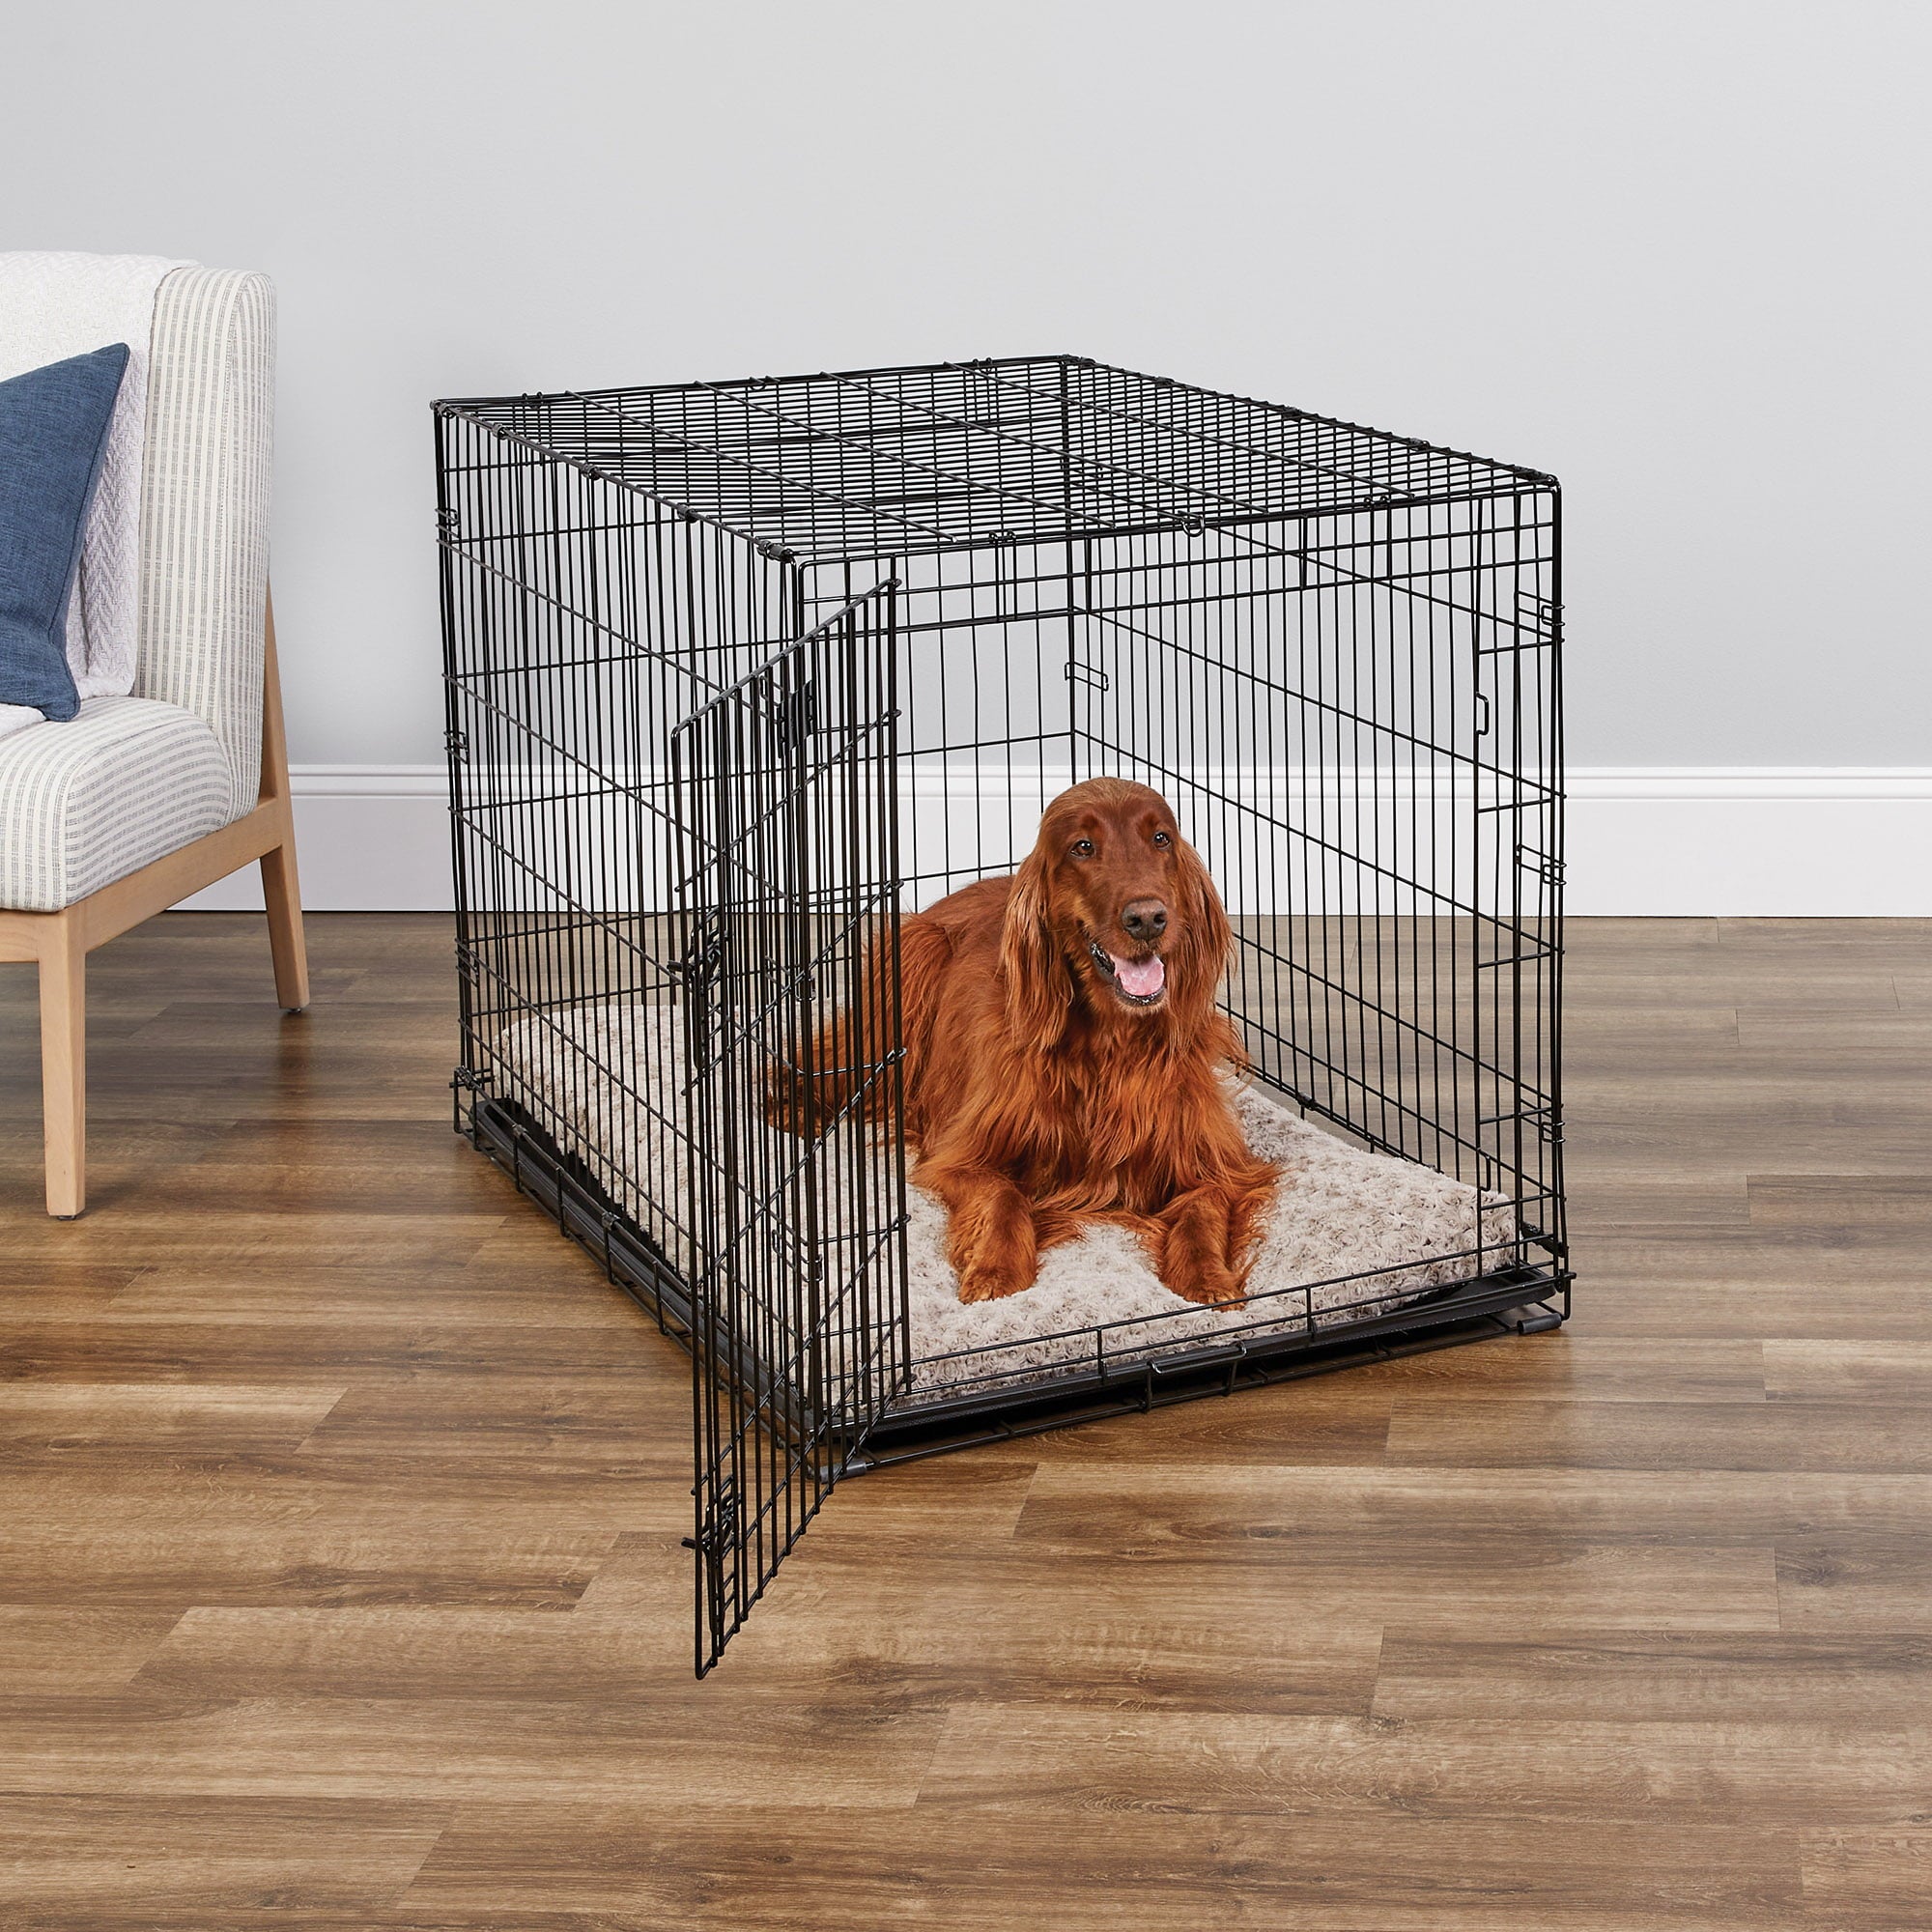 Large Dog Crate | MidWest iCrate Folding Metal Dog Crate | Divider Panel， Floor Protecting Feet， Leak-Proof Dog Pan | 42L x 28W x 31H Inches， Large Dog